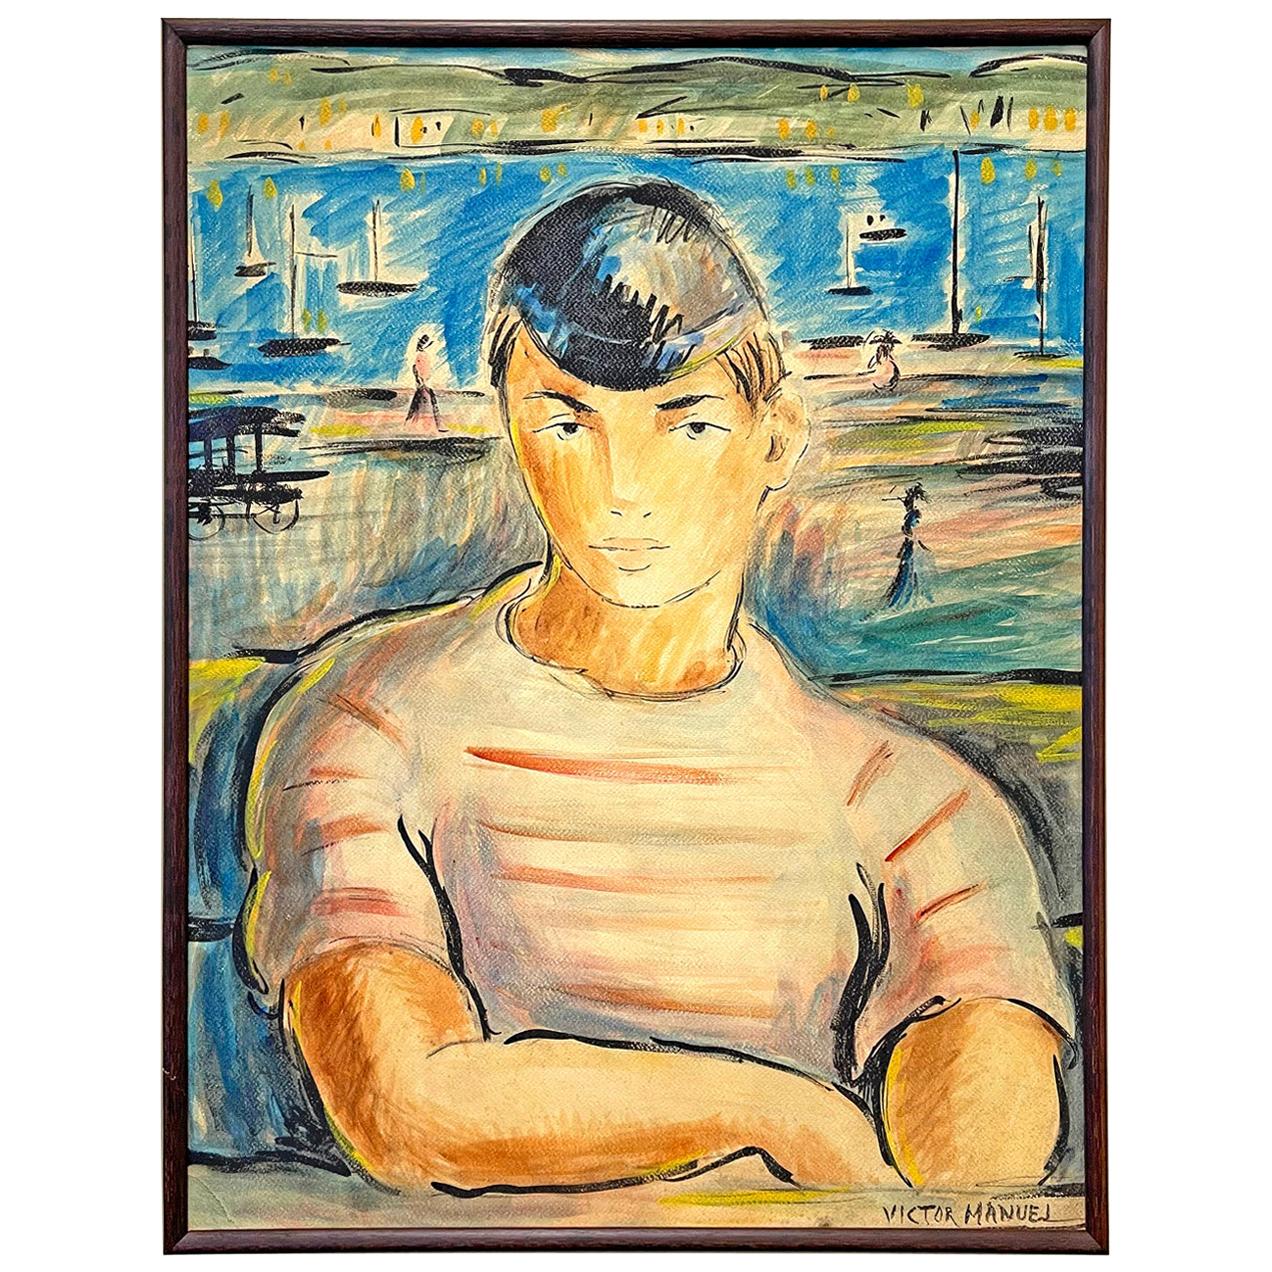 "Young Man in Striped Shirt, " Portrait with Harbor Scene by Cuban Artist For Sale